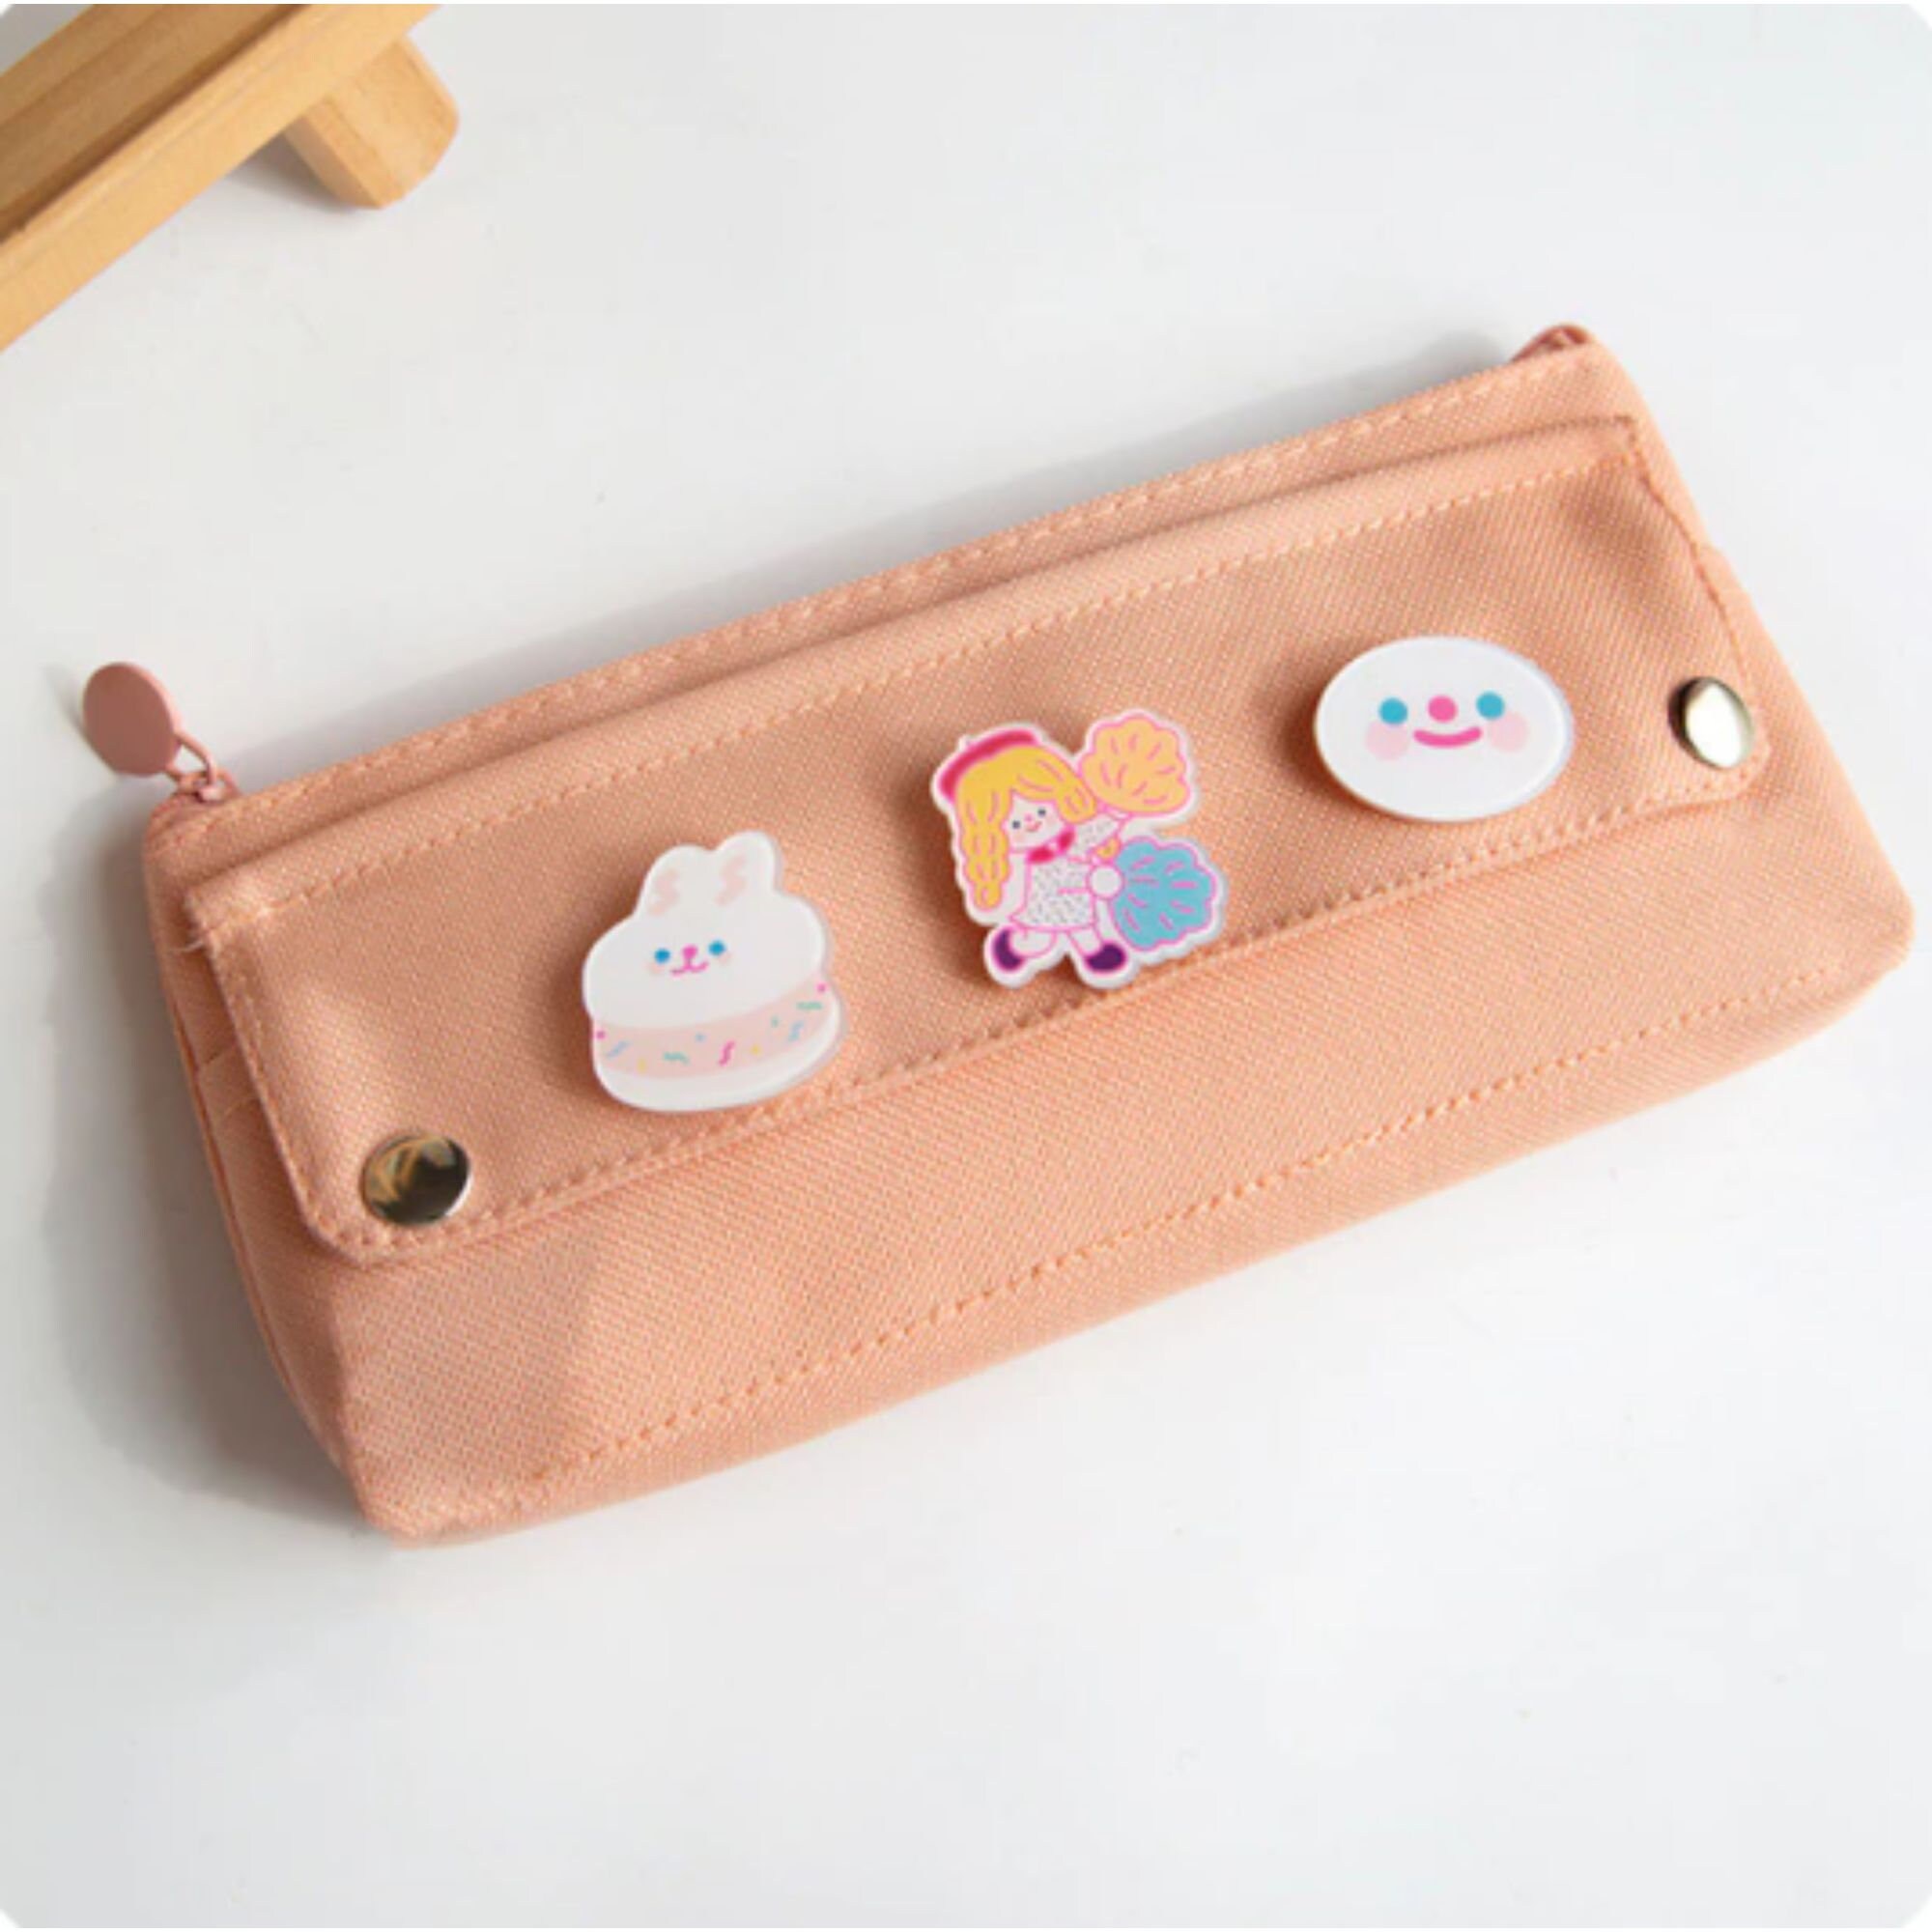 Momeitu Kawaii Large Pencil Case Stationery Storage Bags Canvas Pencil Bag  Cute Makeup Bag School Supplies For Girl Kids Gift W/Badge(A-Blue) -  Imported Products from USA - iBhejo